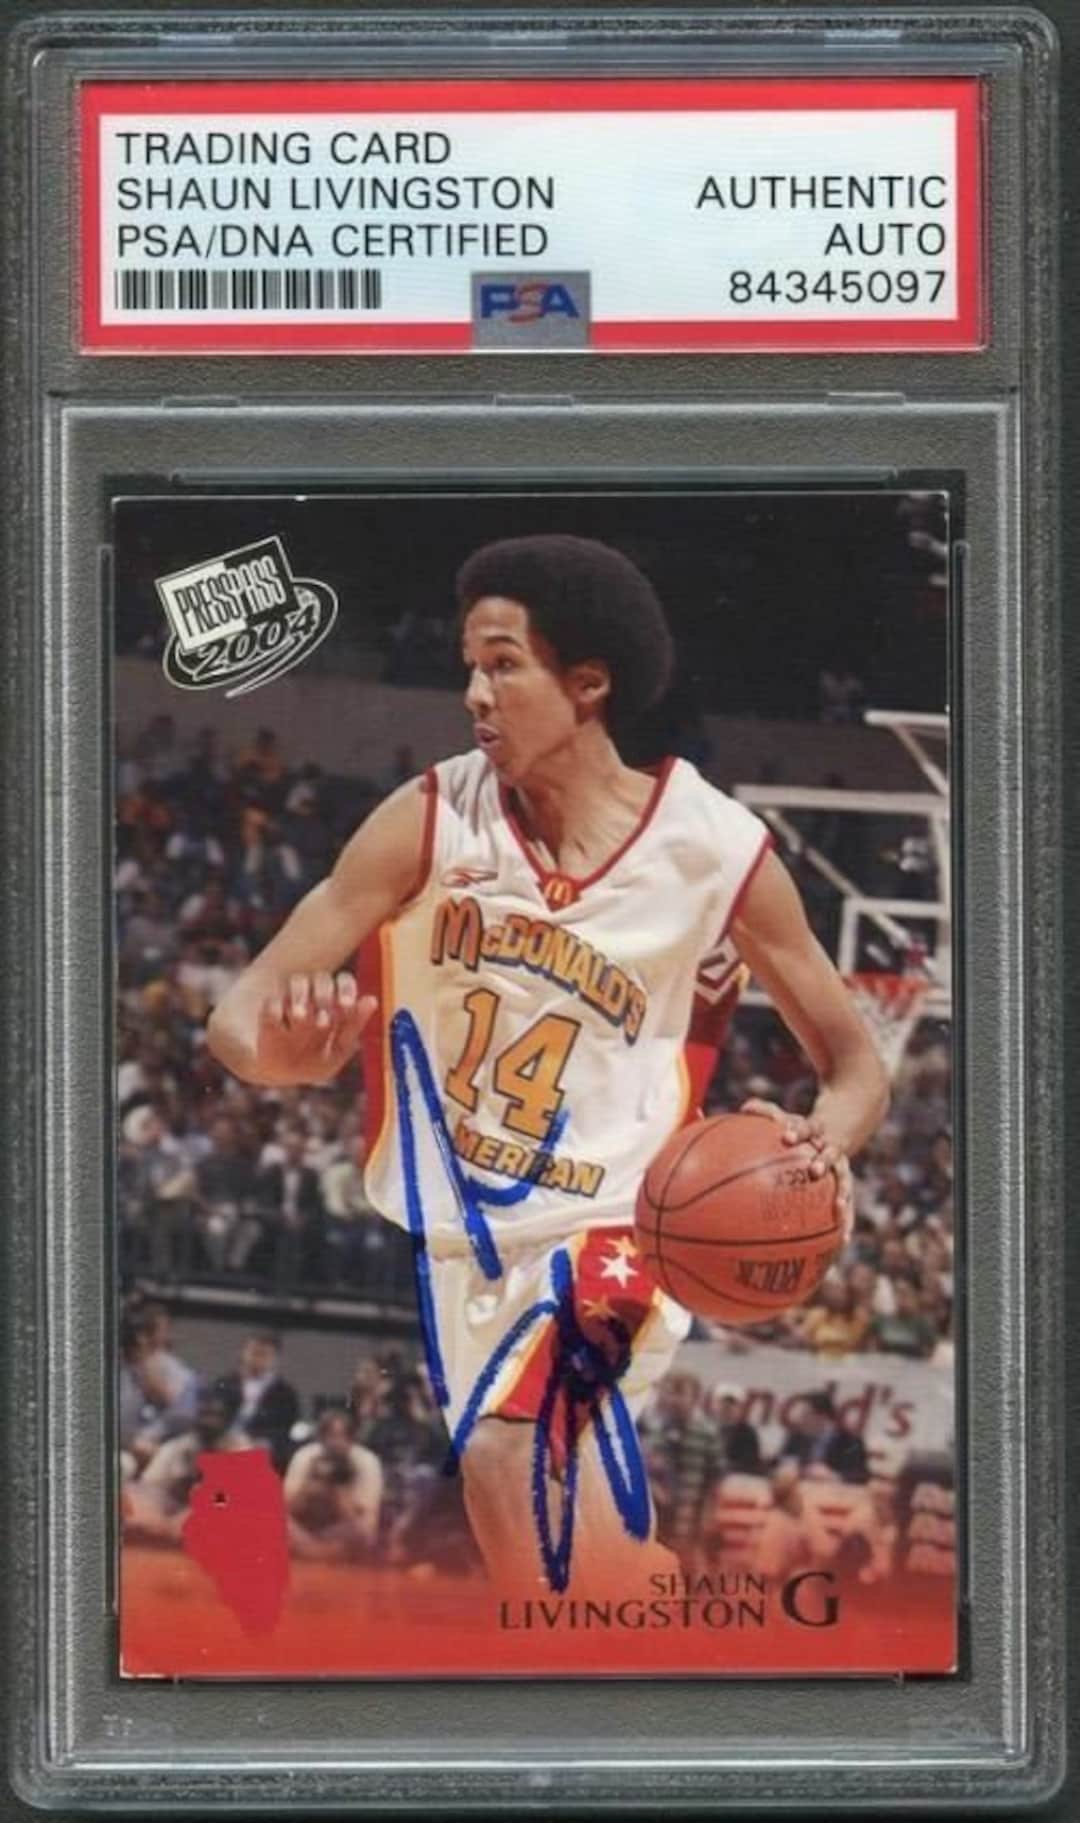 Shaun Livingston Clippers Signed 8 x 10